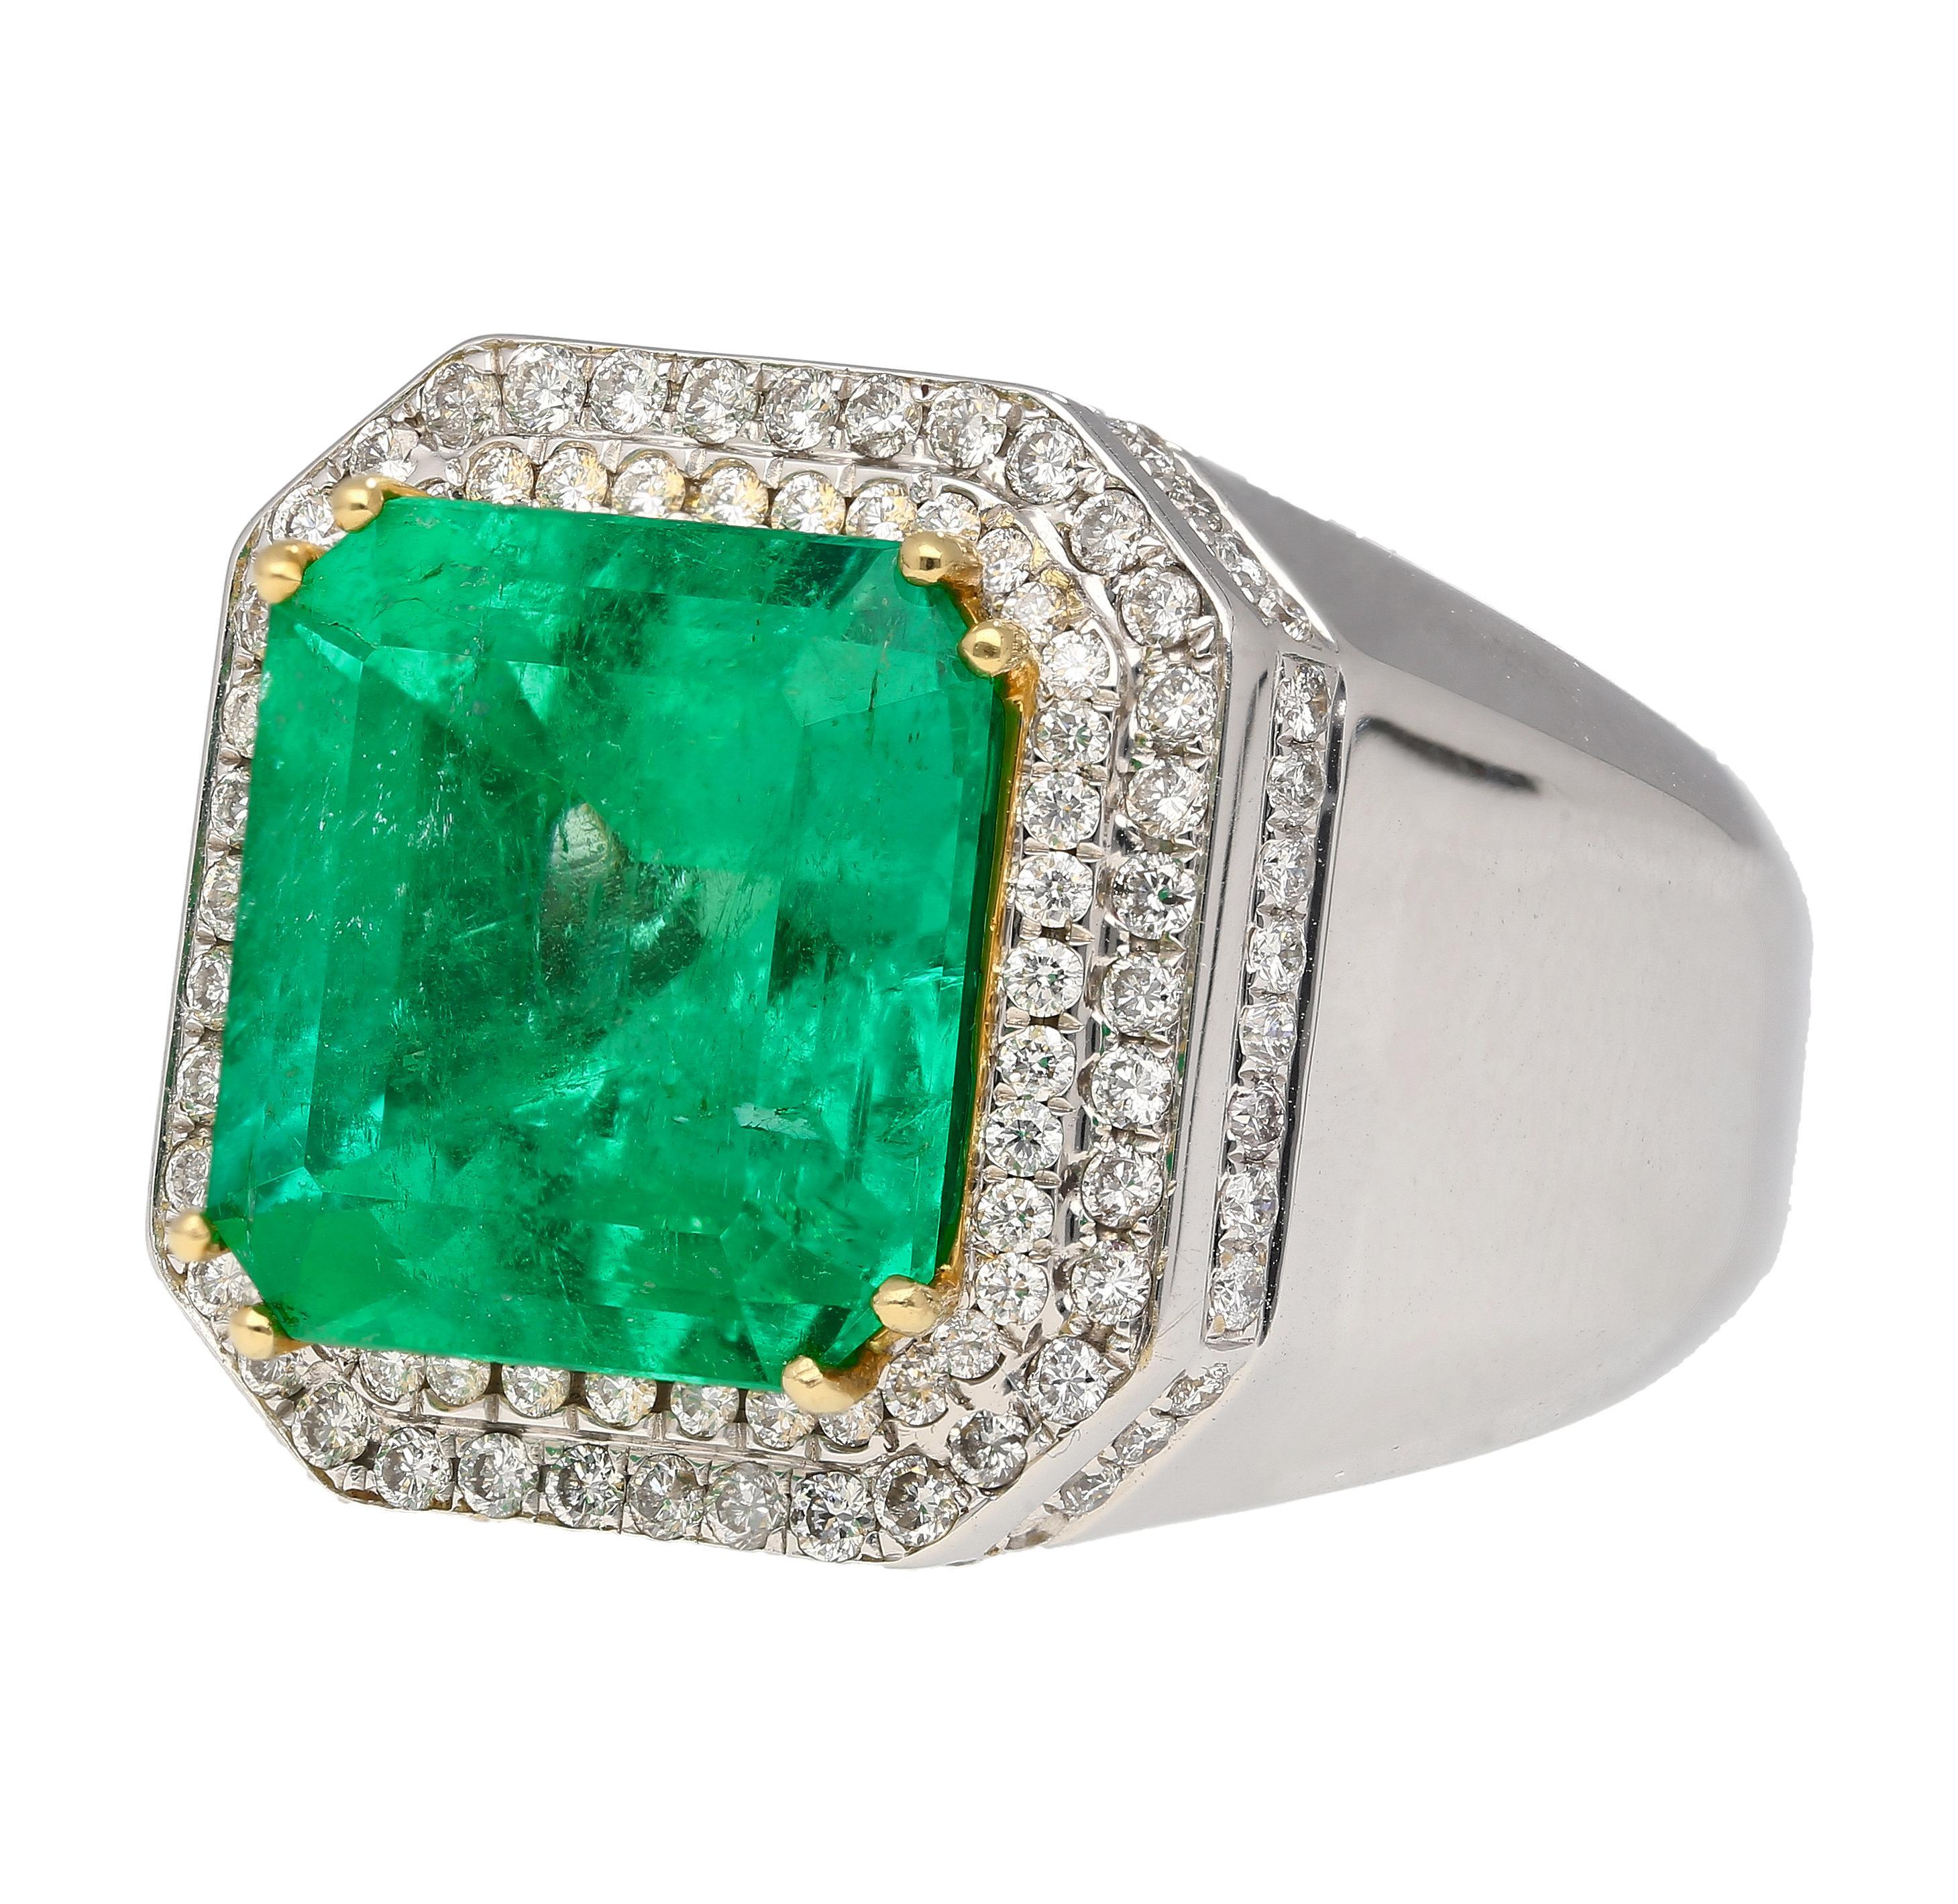 GRS certified 9.54 carat insignificant oil Colombian emerald and diamond mens ring. Featuring a round cut diamond halo and smooth polished 18k gold finish. A noticeably valuable ring with an unmistakably natural emerald. A large face with